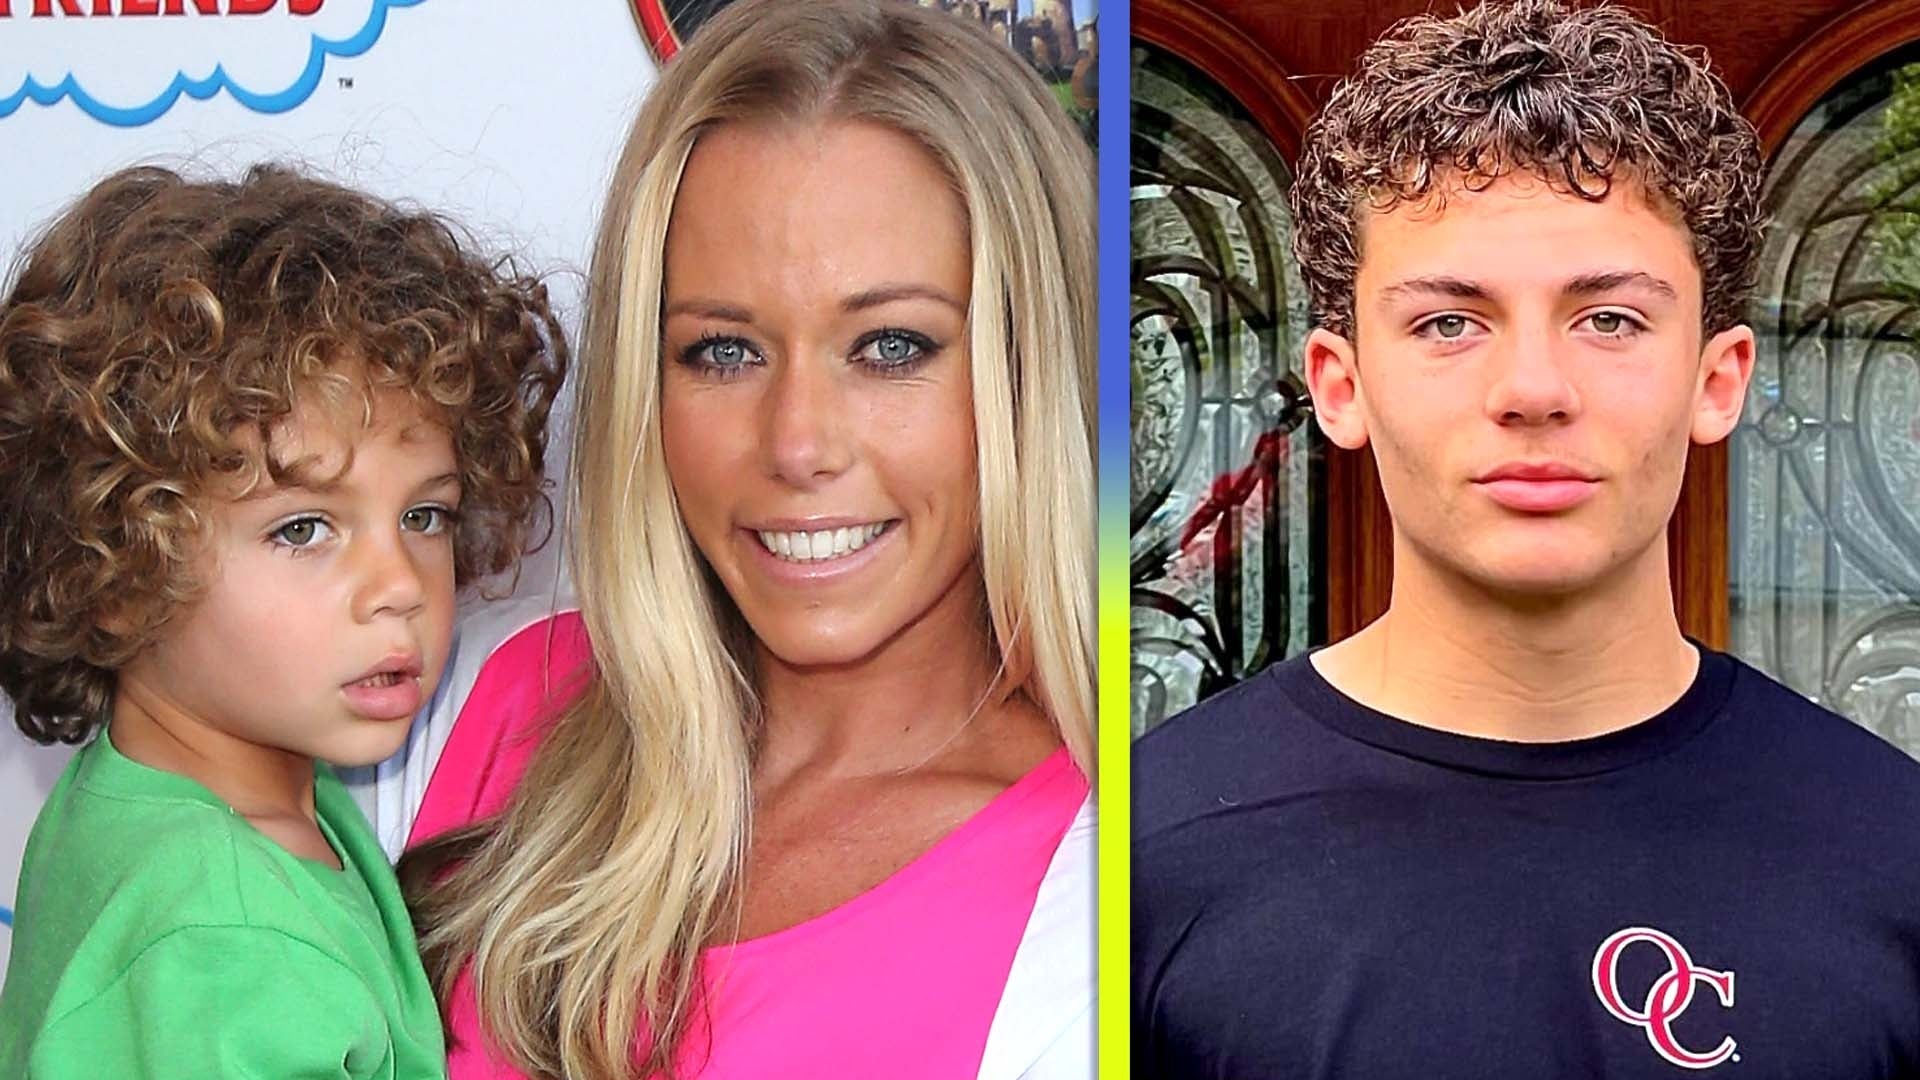  Kendra Wilkinson's 14-Year-Old Son Hank Looks So Grown Up in Proud Mom Moment